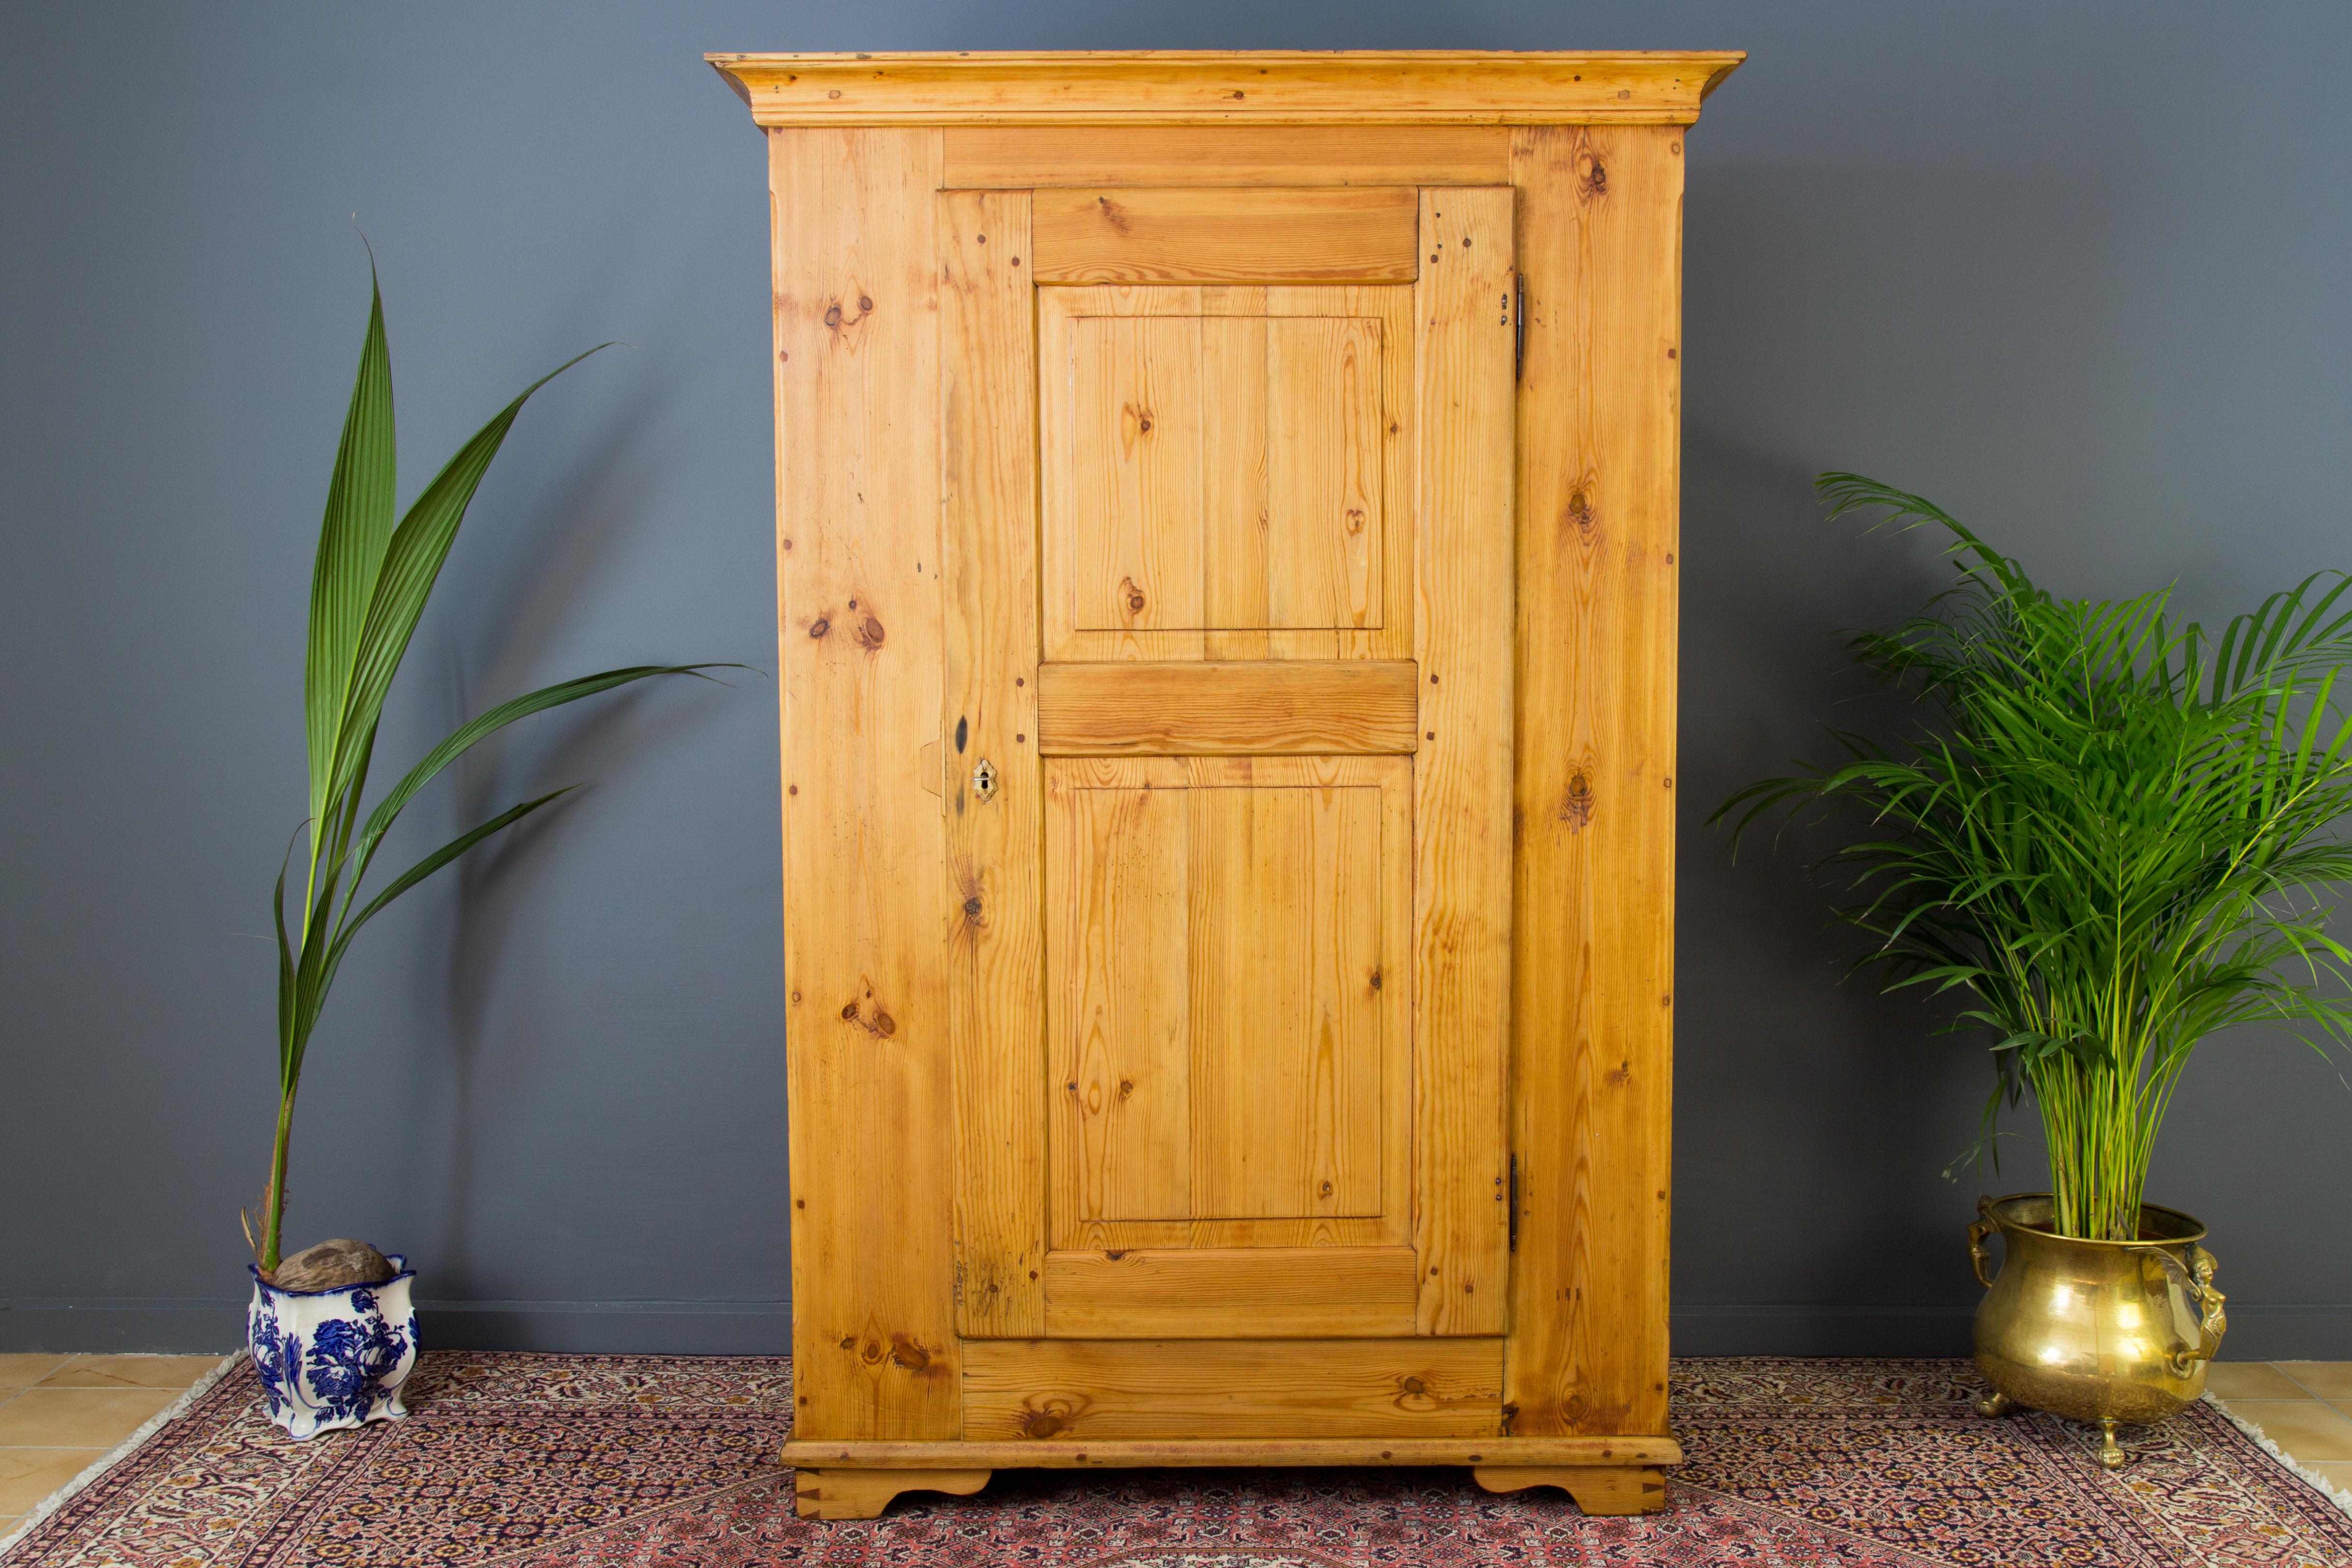 One-door armoire of Baltic pine with five shelves. The wardrobe is in one piece and is of very solid construction and in very good antique condition. Please expect some dents, marks and scuffs due to its age. This is a good very solid, rustic and